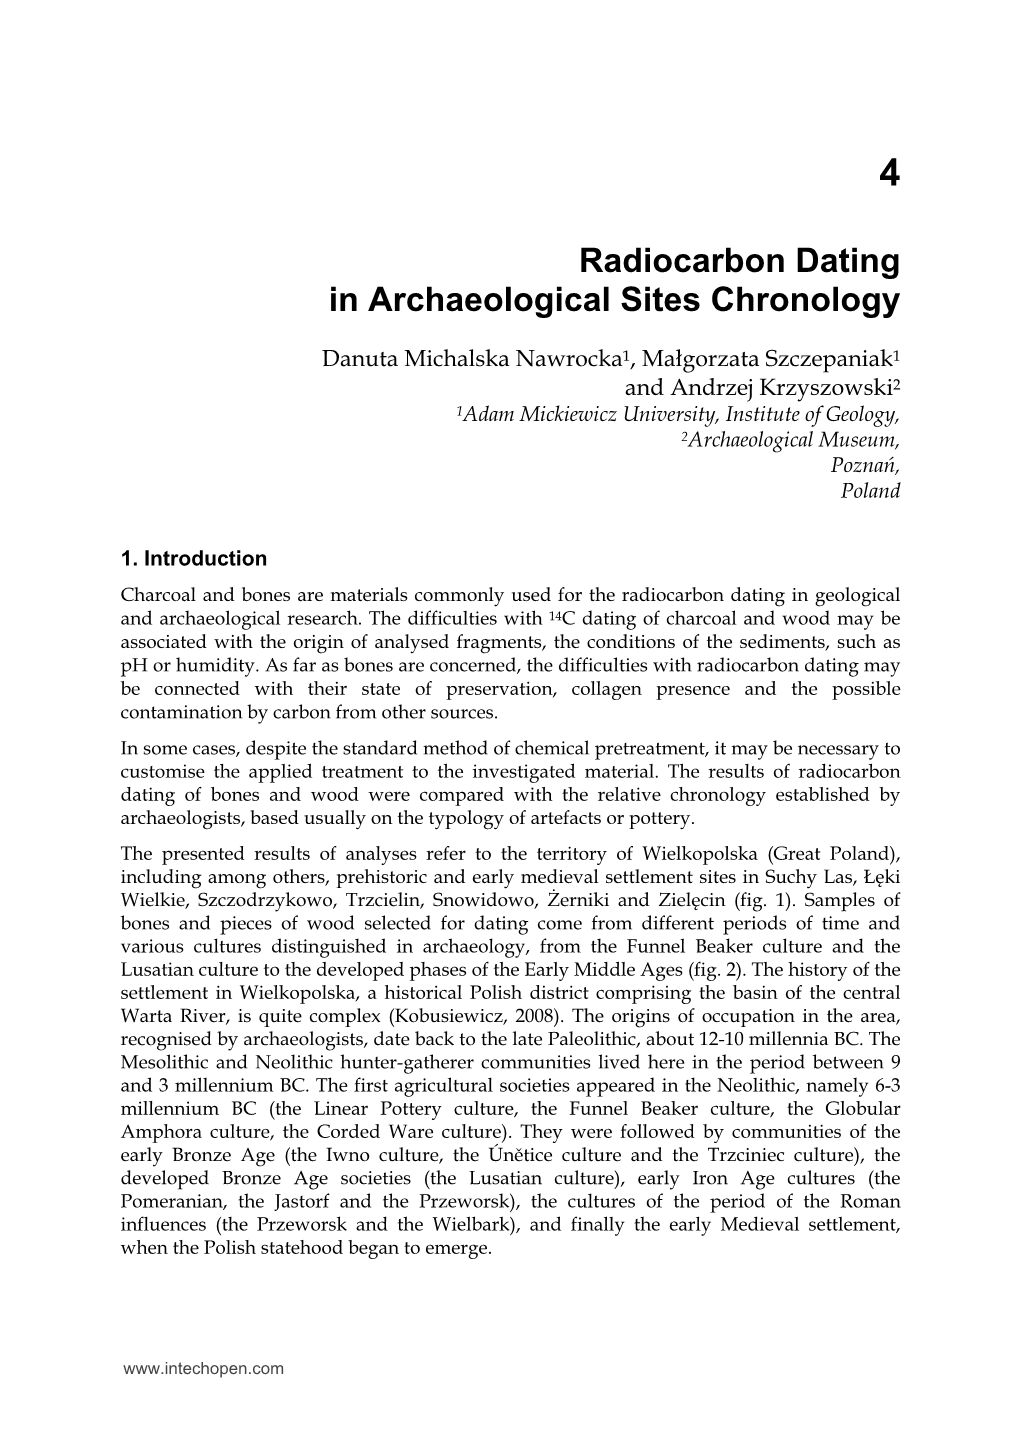 Radiocarbon Dating in Archaeological Sites Chronology